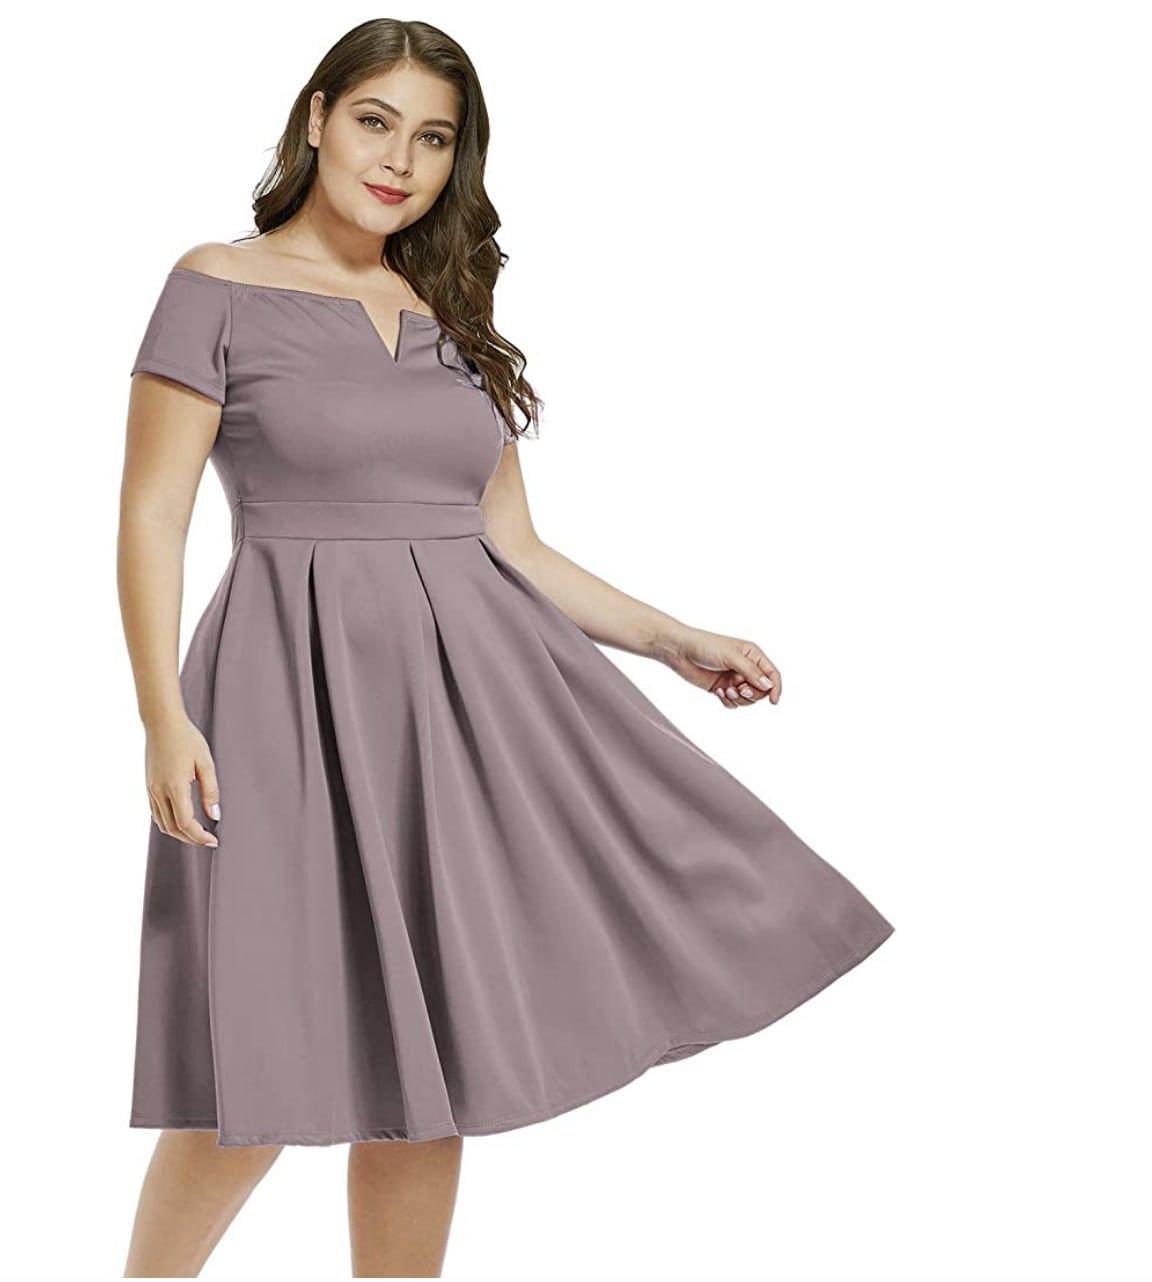 Style B07BPXV9LM Lalagen Plus Size 18 Bridesmaid Purple Cocktail Dress on Queenly